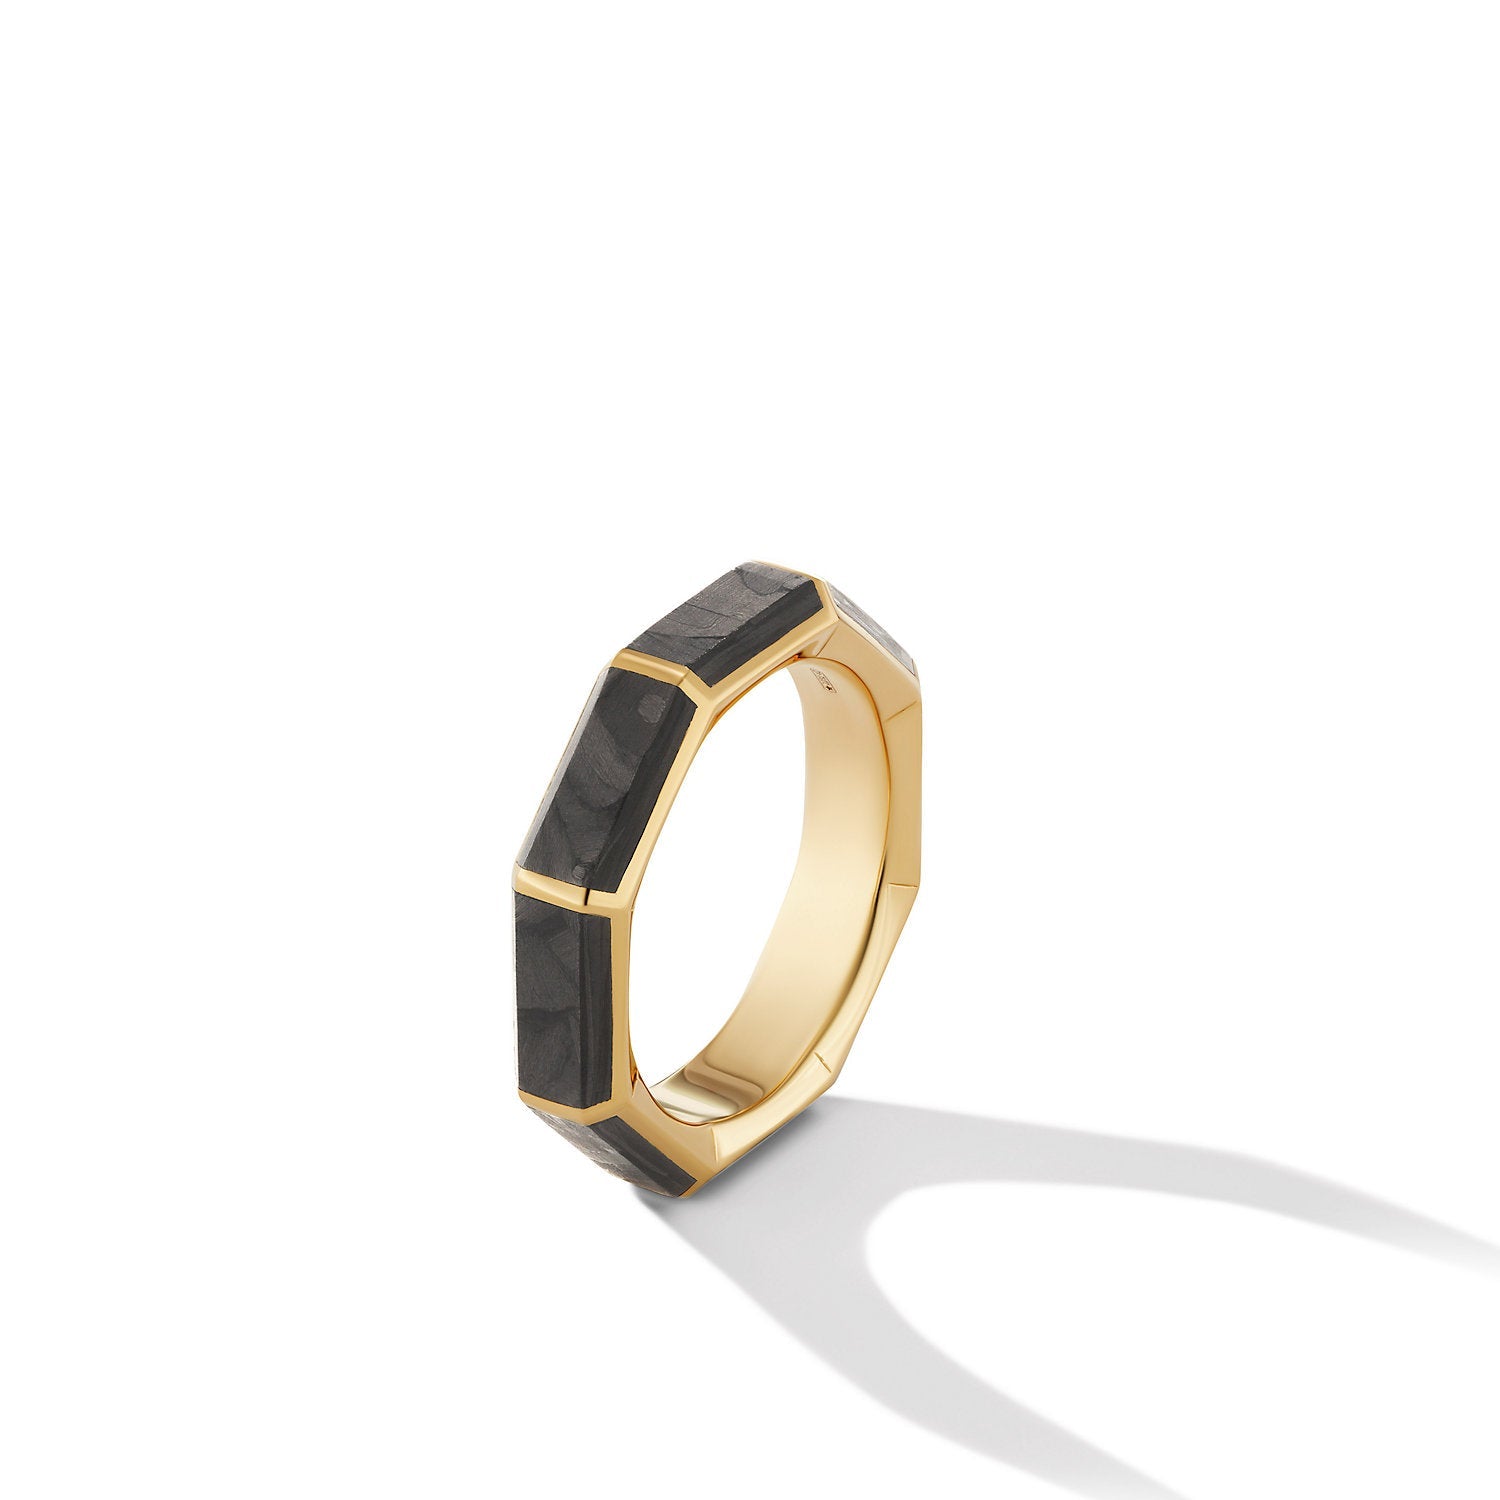 FORGED CARBON FACETED BAND RING WITH 18K YELLOW GOLD